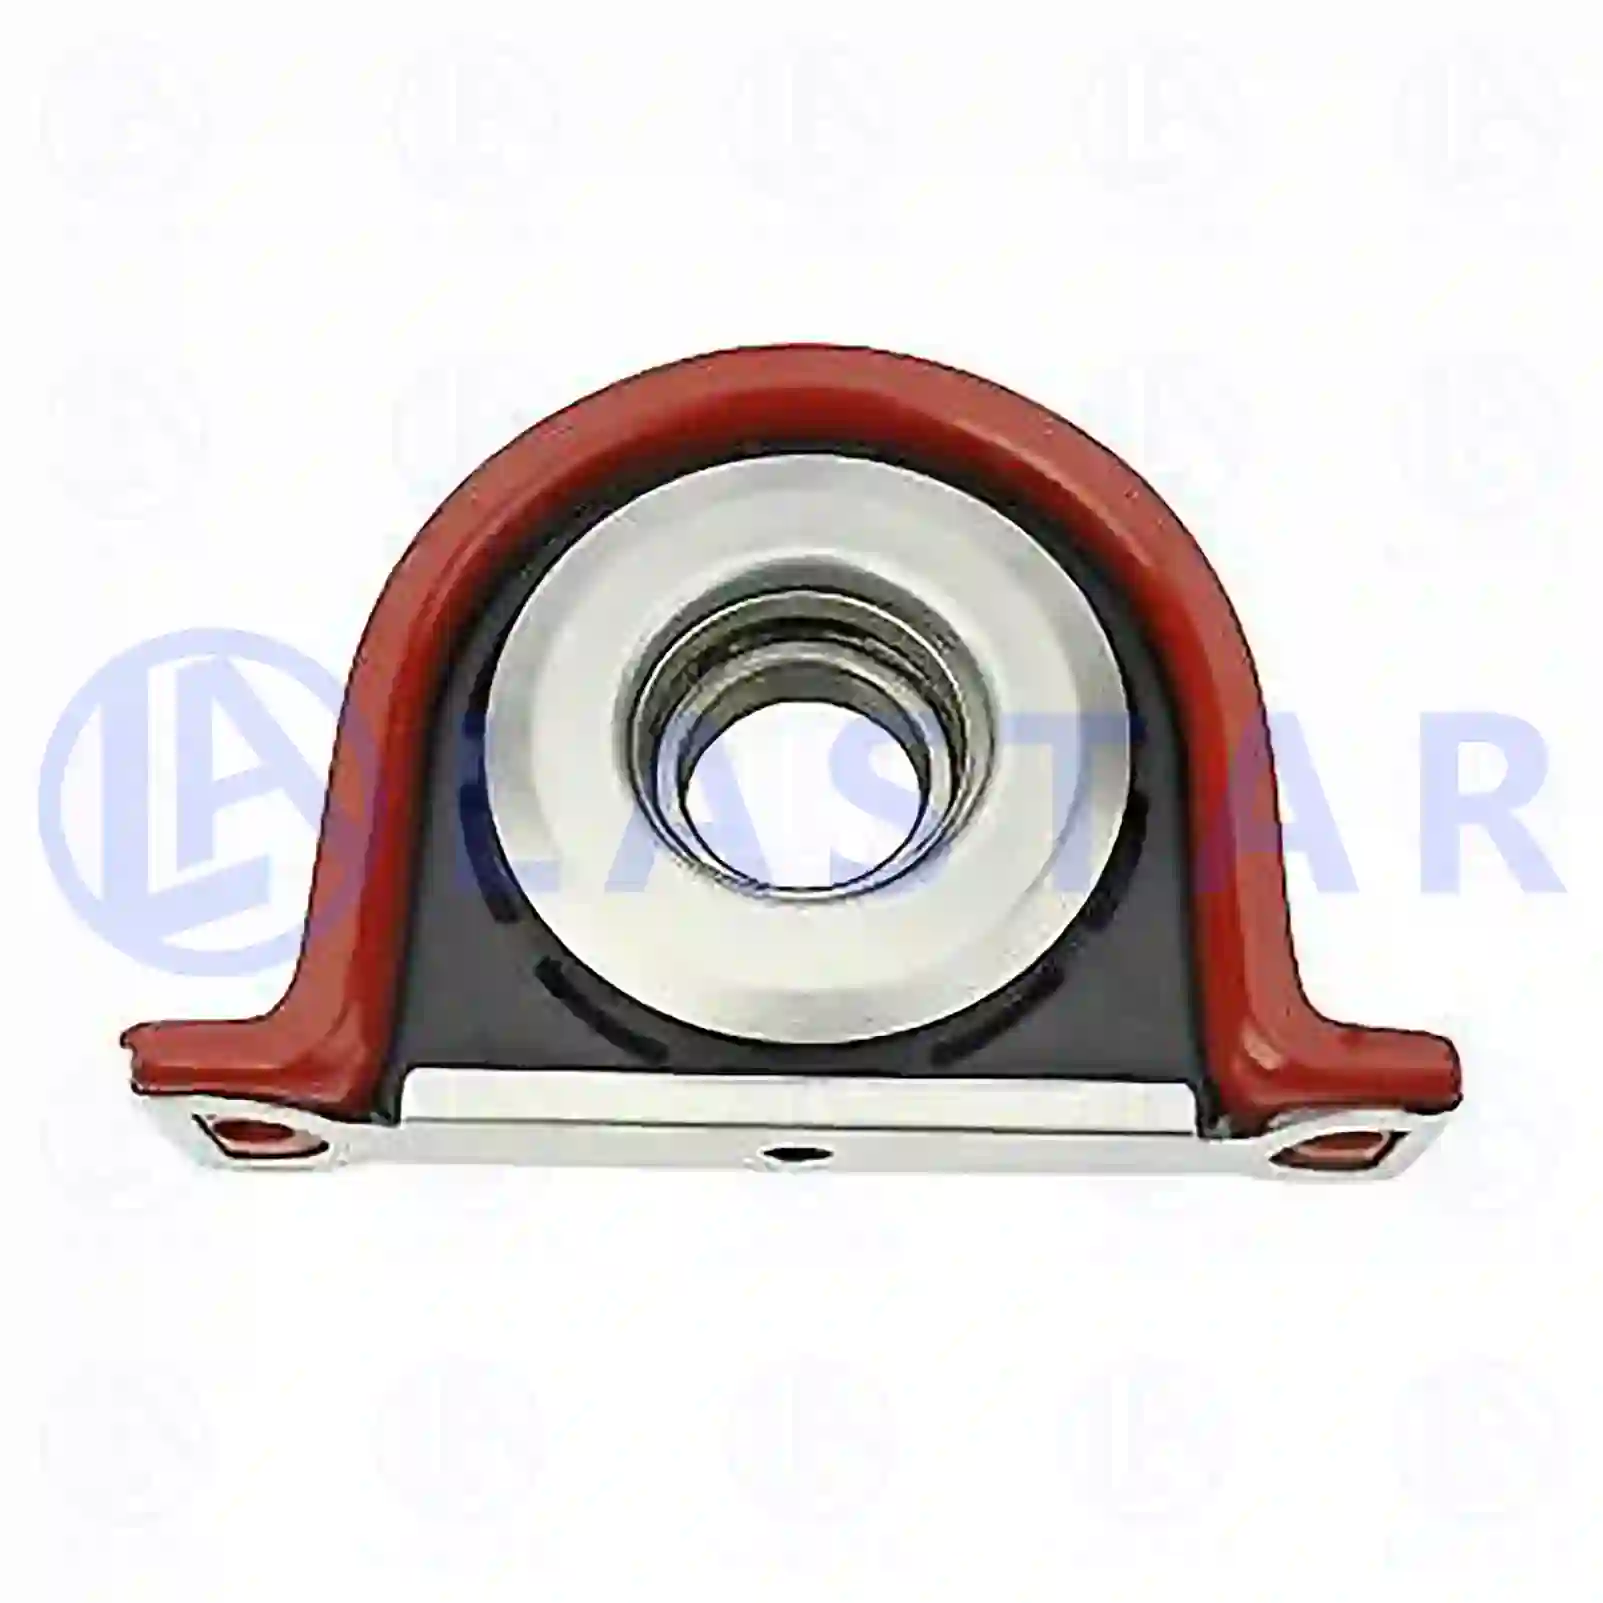 Support Bearing Center bearing, la no: 77734322 ,  oem no:5000821936 Lastar Spare Part | Truck Spare Parts, Auotomotive Spare Parts